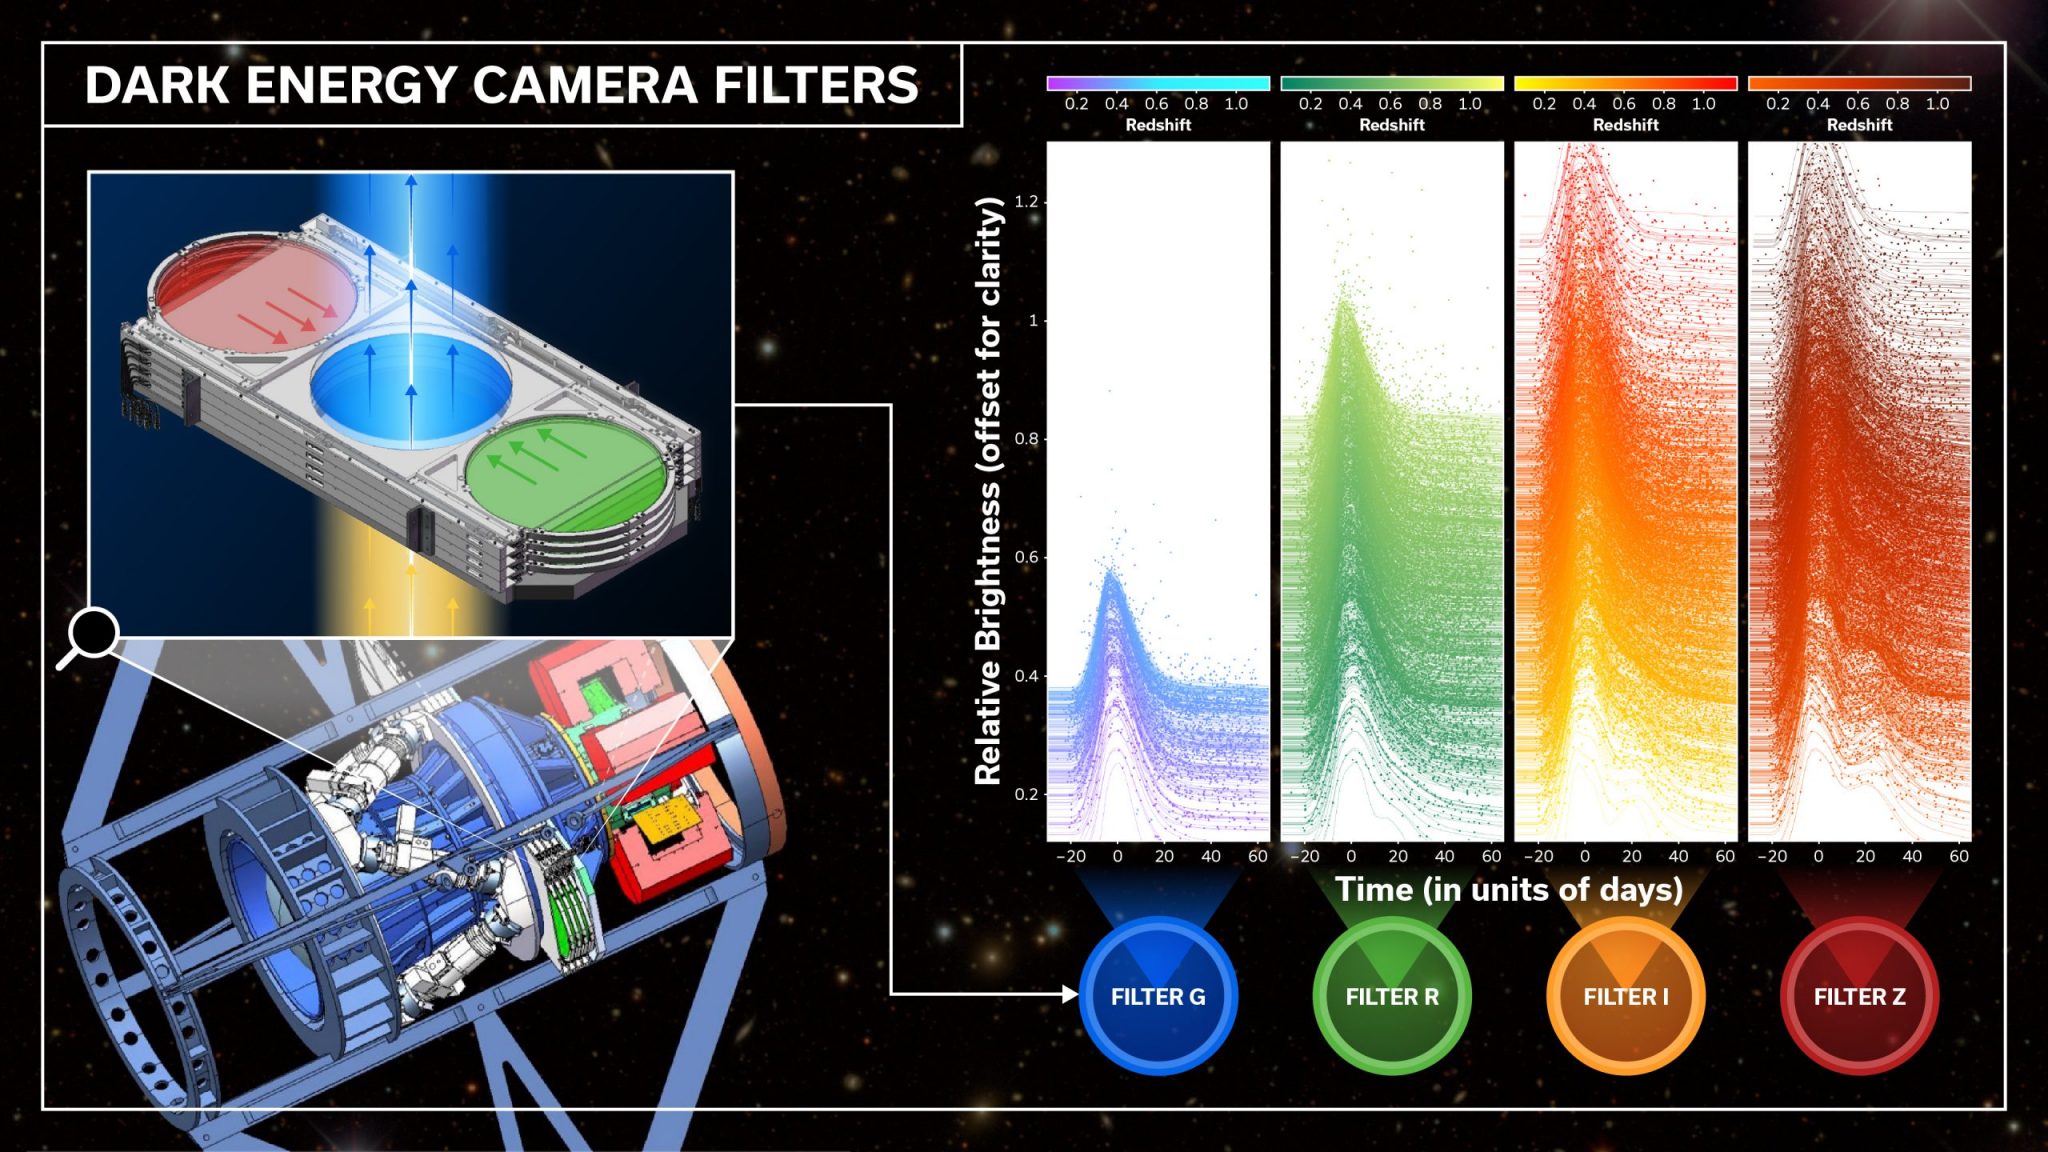 This diagram shows the filter system installed on the Dark Energy Camera used by DES to discover supernovae and monitor their brightness evolution